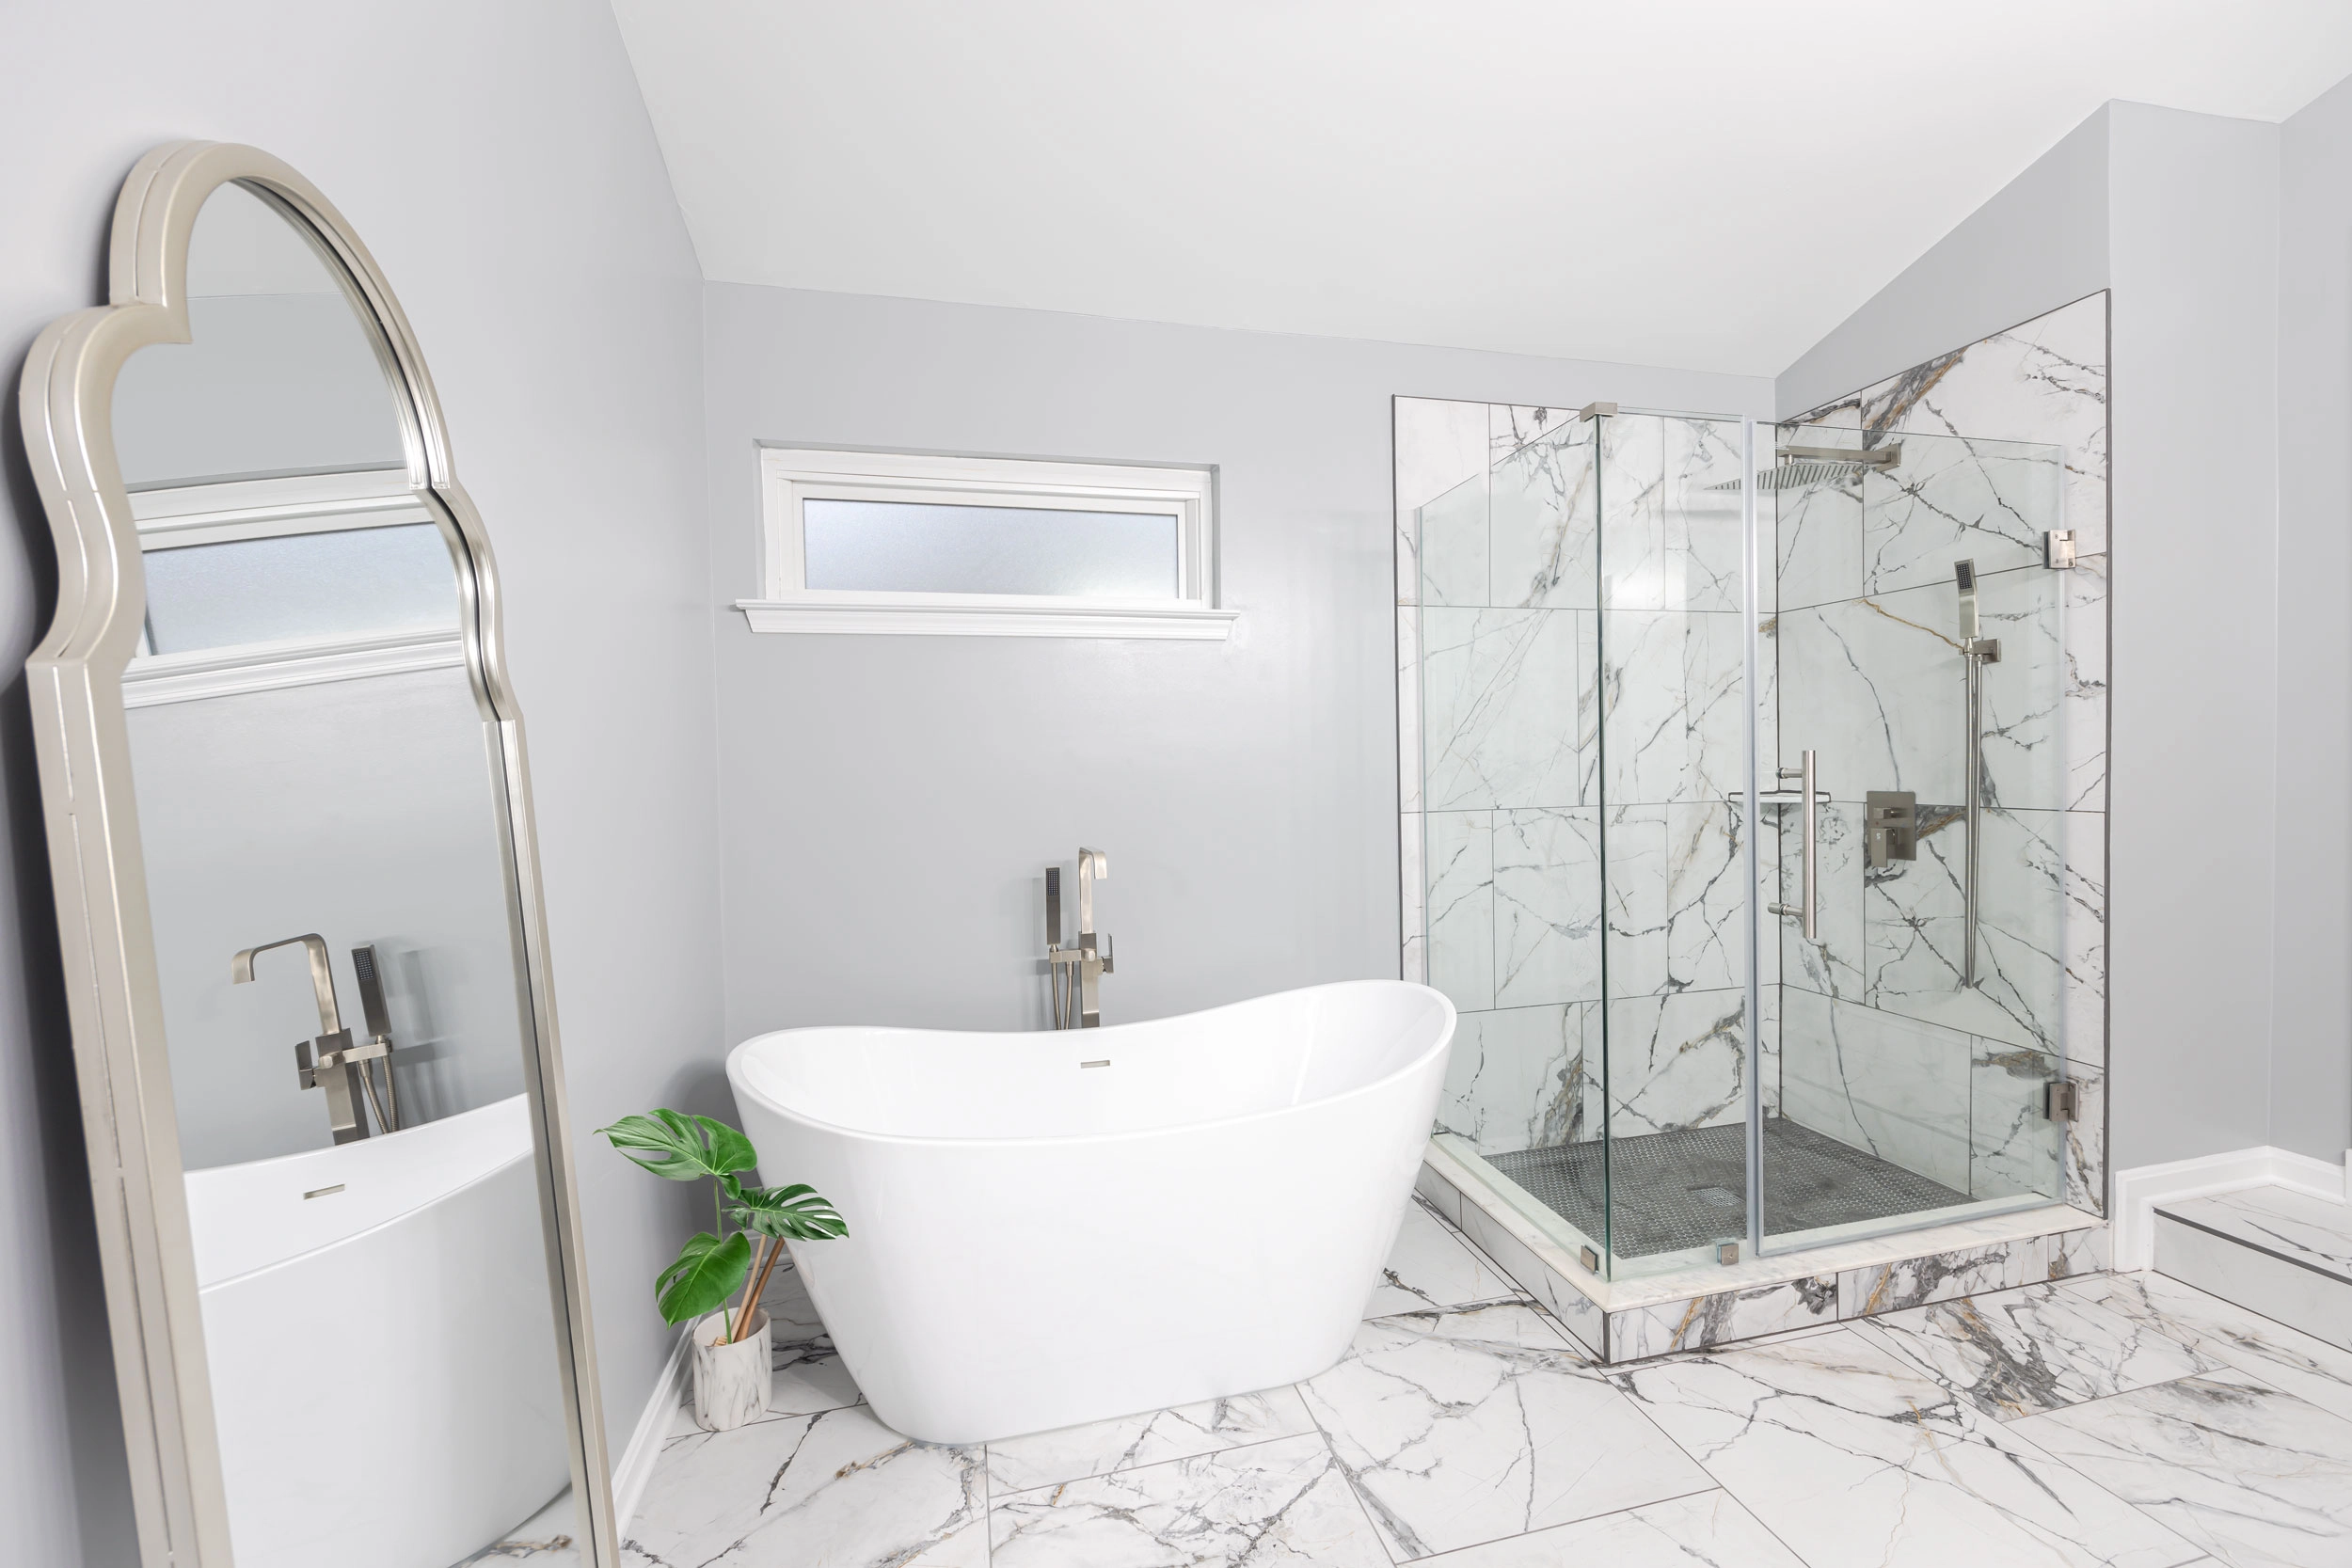 A team of Zion Home Remodeling professionals efficiently working together to expedite a bathroom renovation project, emphasizing their commitment to timely and seamless service.